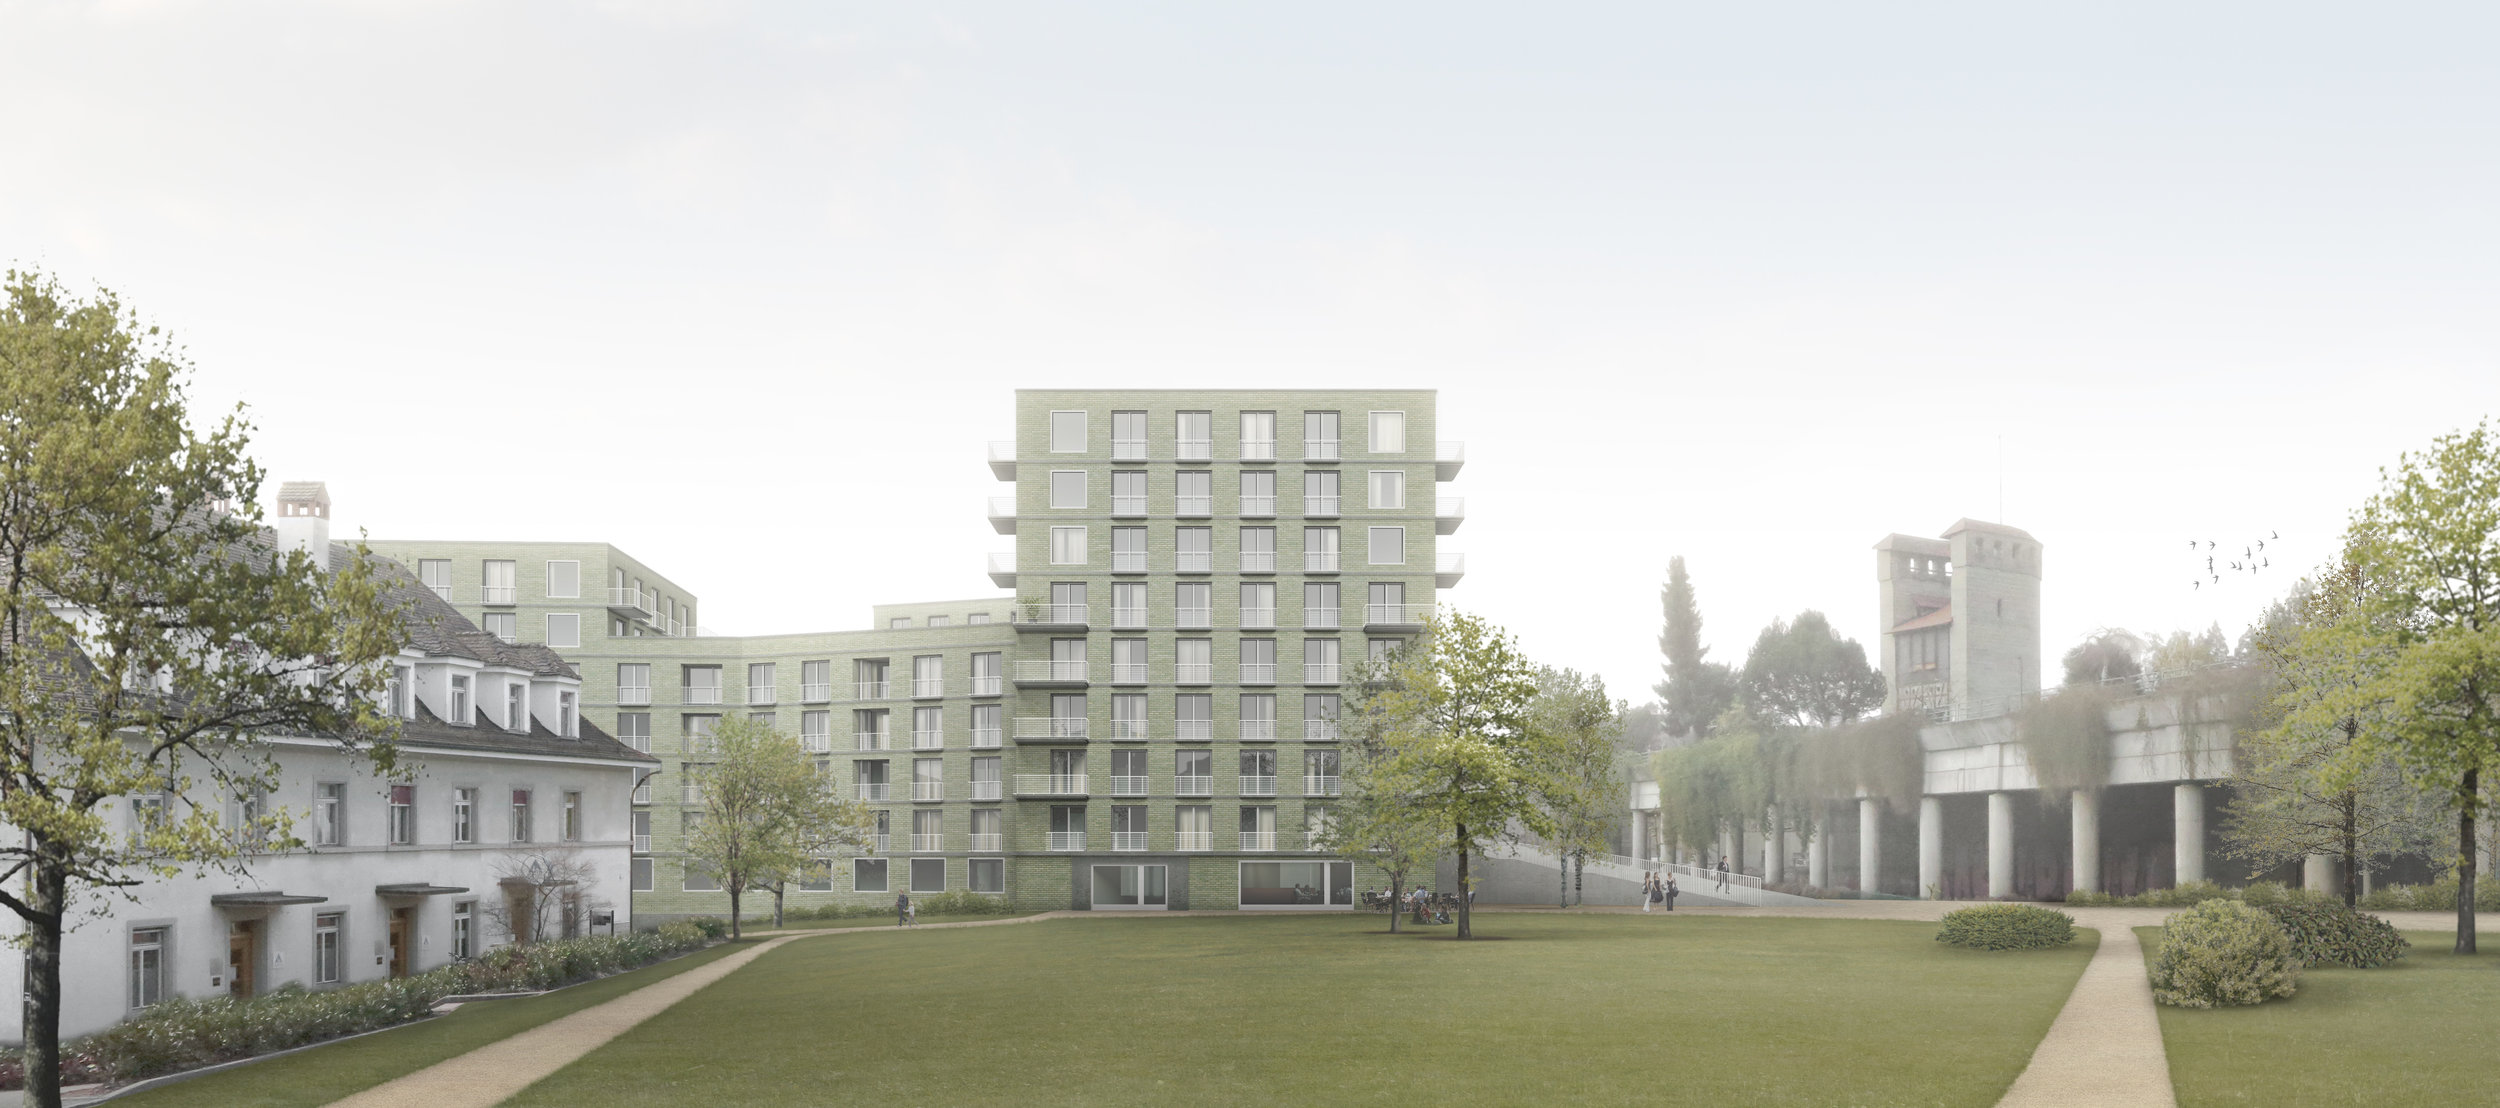 Offices and Housing, Fribourg